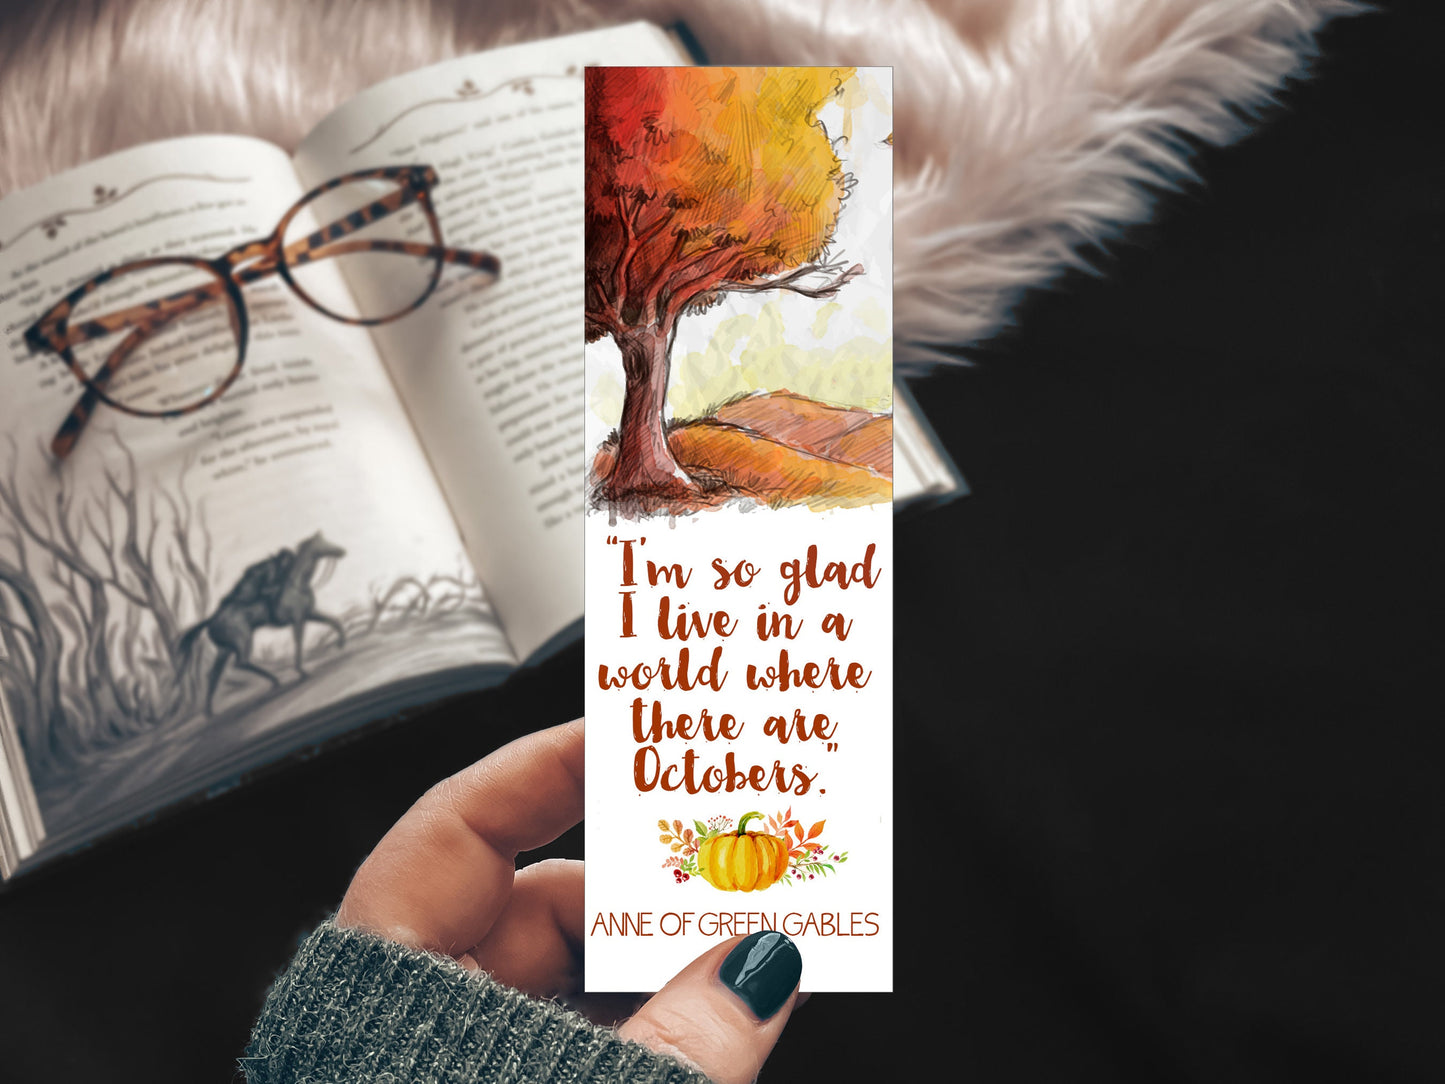 Anne of Green Gables Bookmark, I'm So Glad I Live In a World Where There Are Octobers